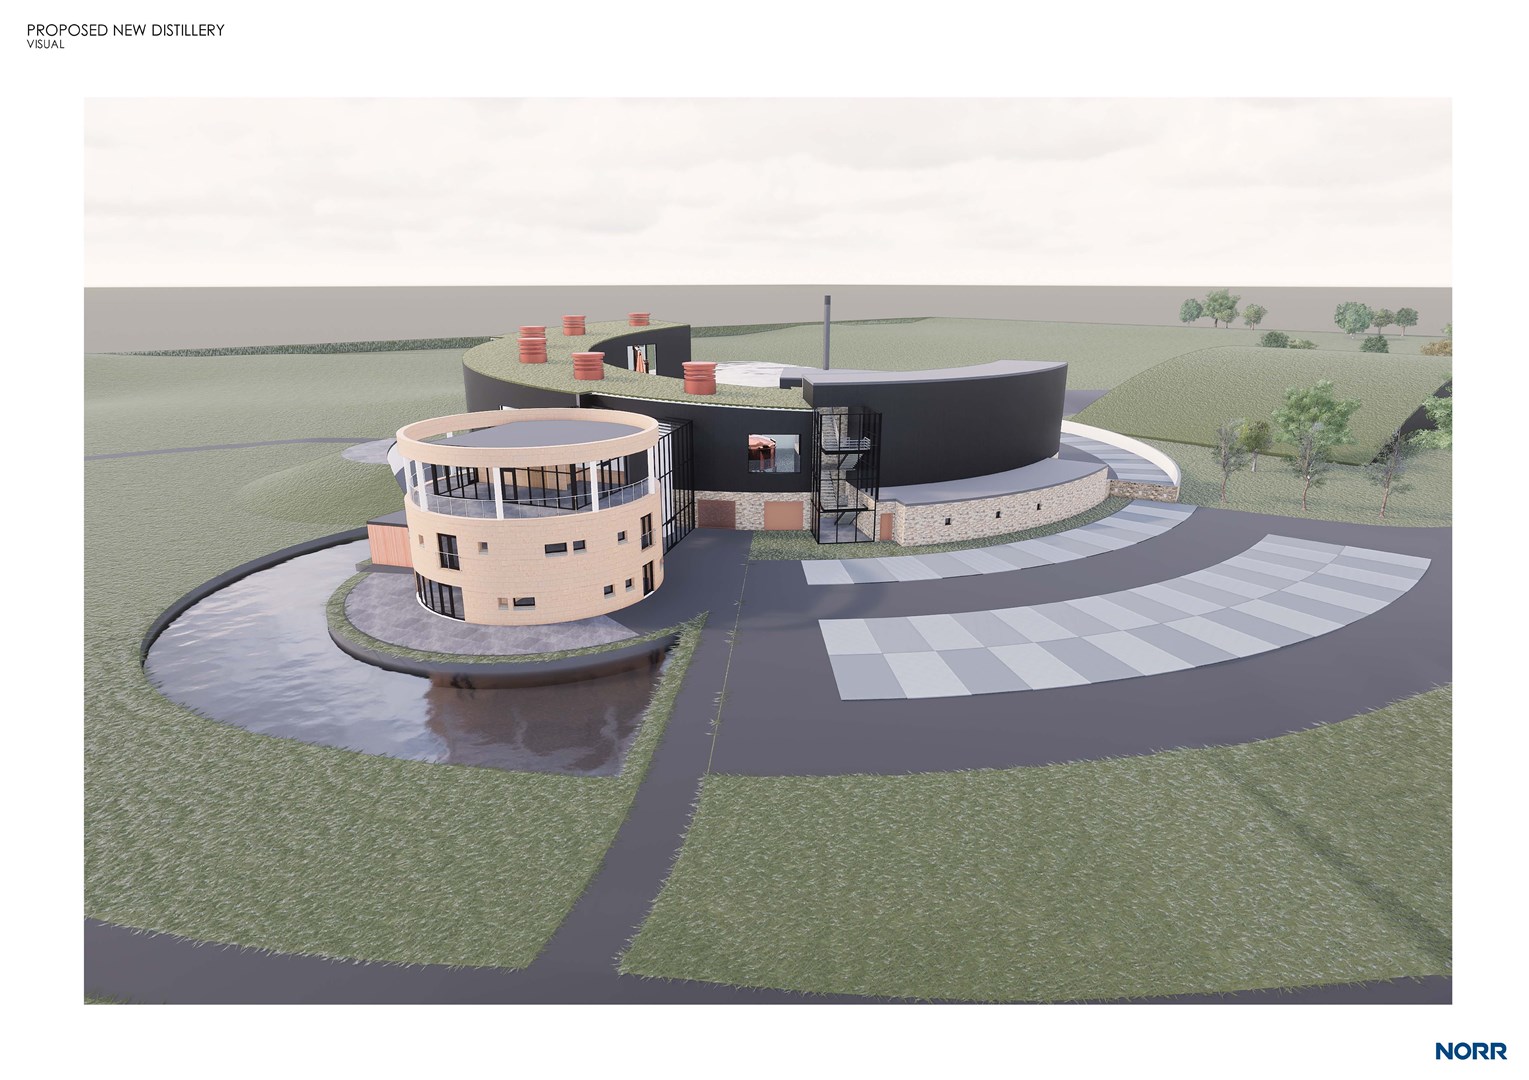 The eye-catching design for the new distillery planned by one of the main gateways into Grantown.